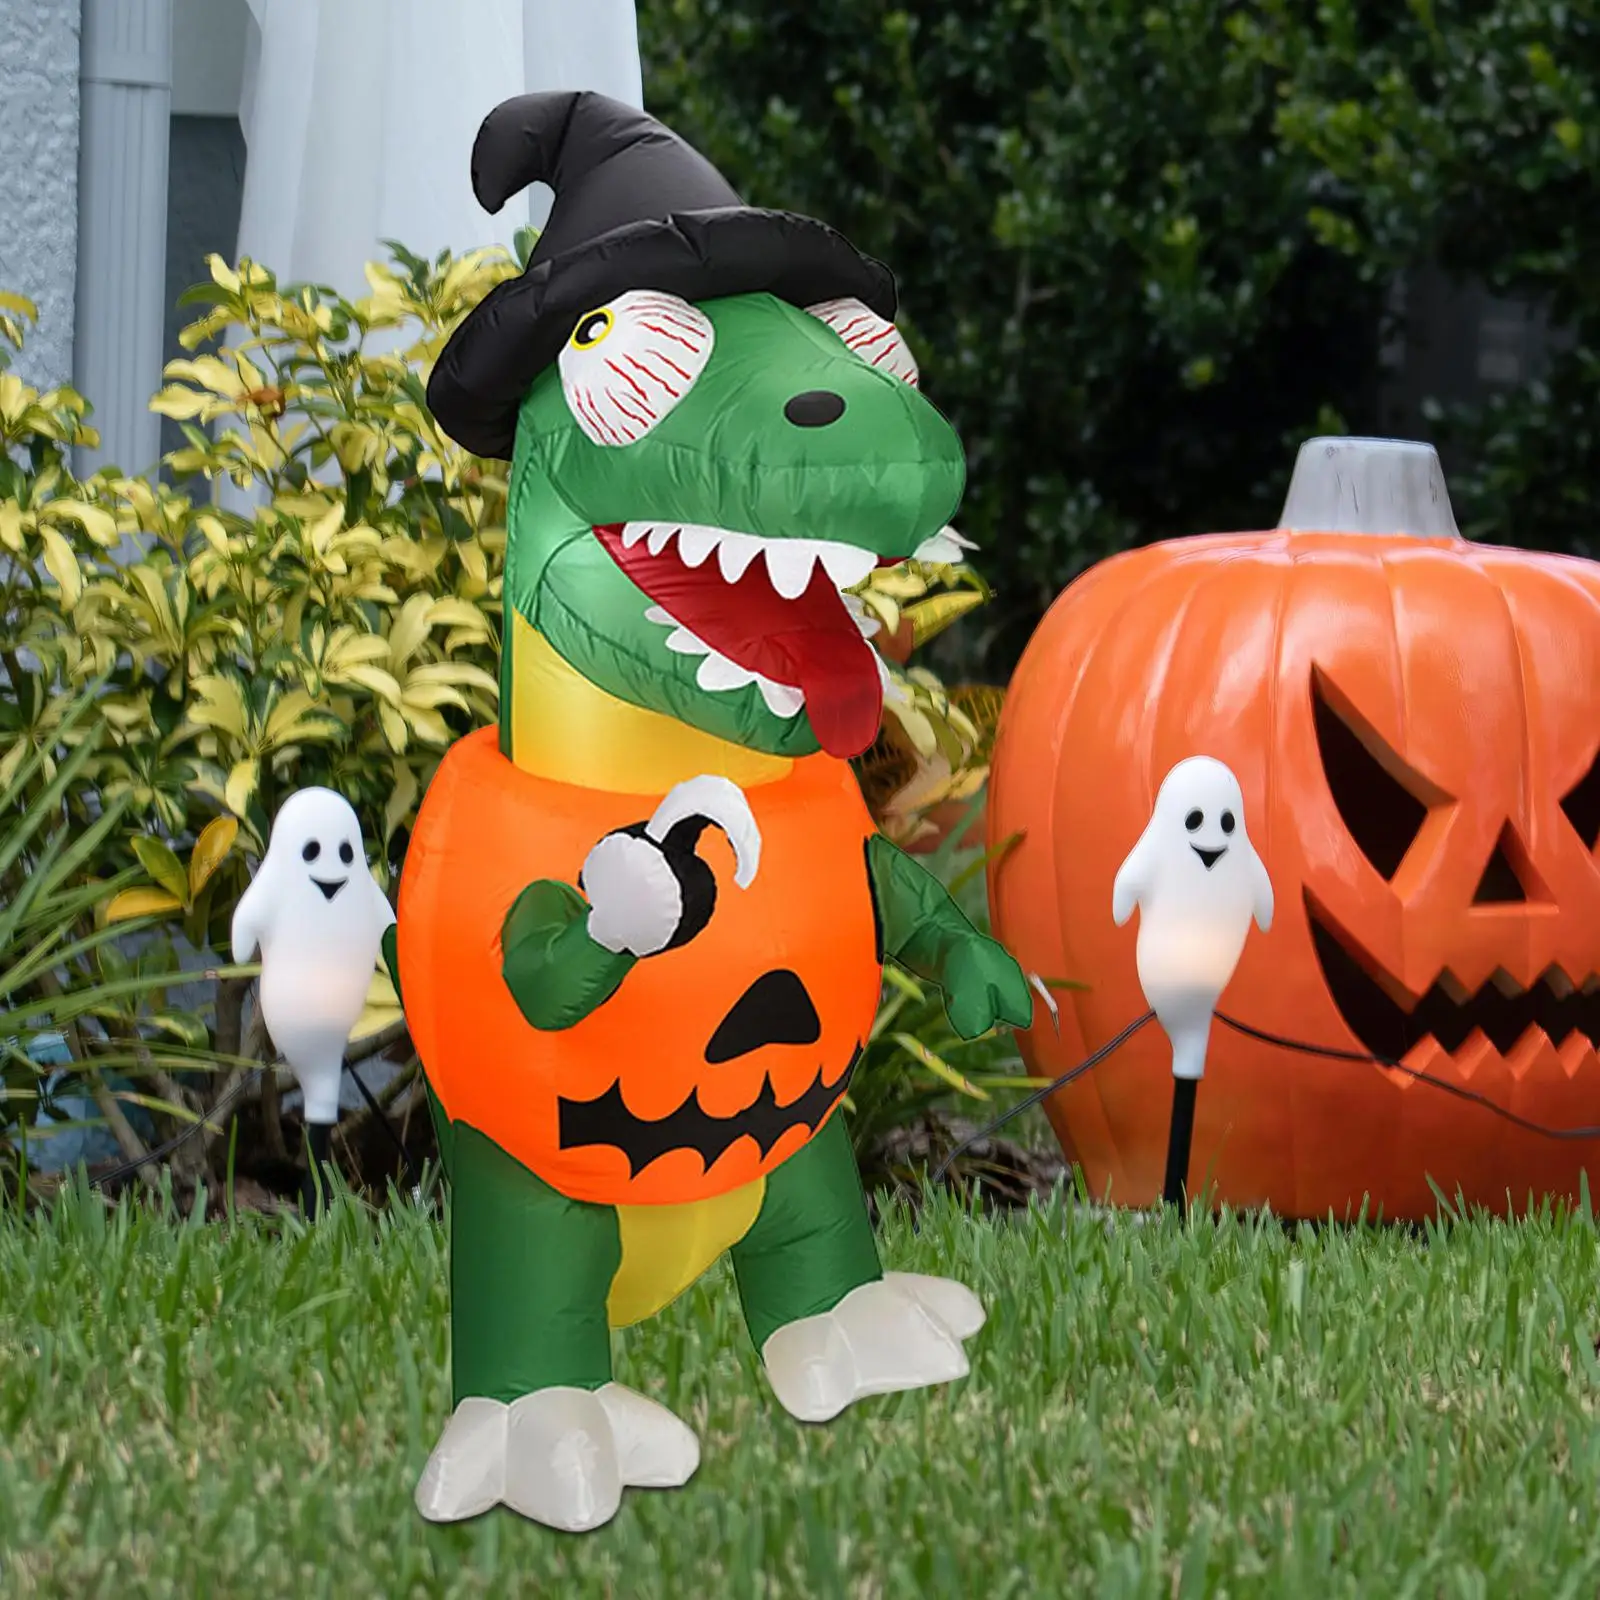 5.9 ft Tall Halloween Inflatable Pumpkin Dinosaur Lighted Inflatable for Outdoor Lawn